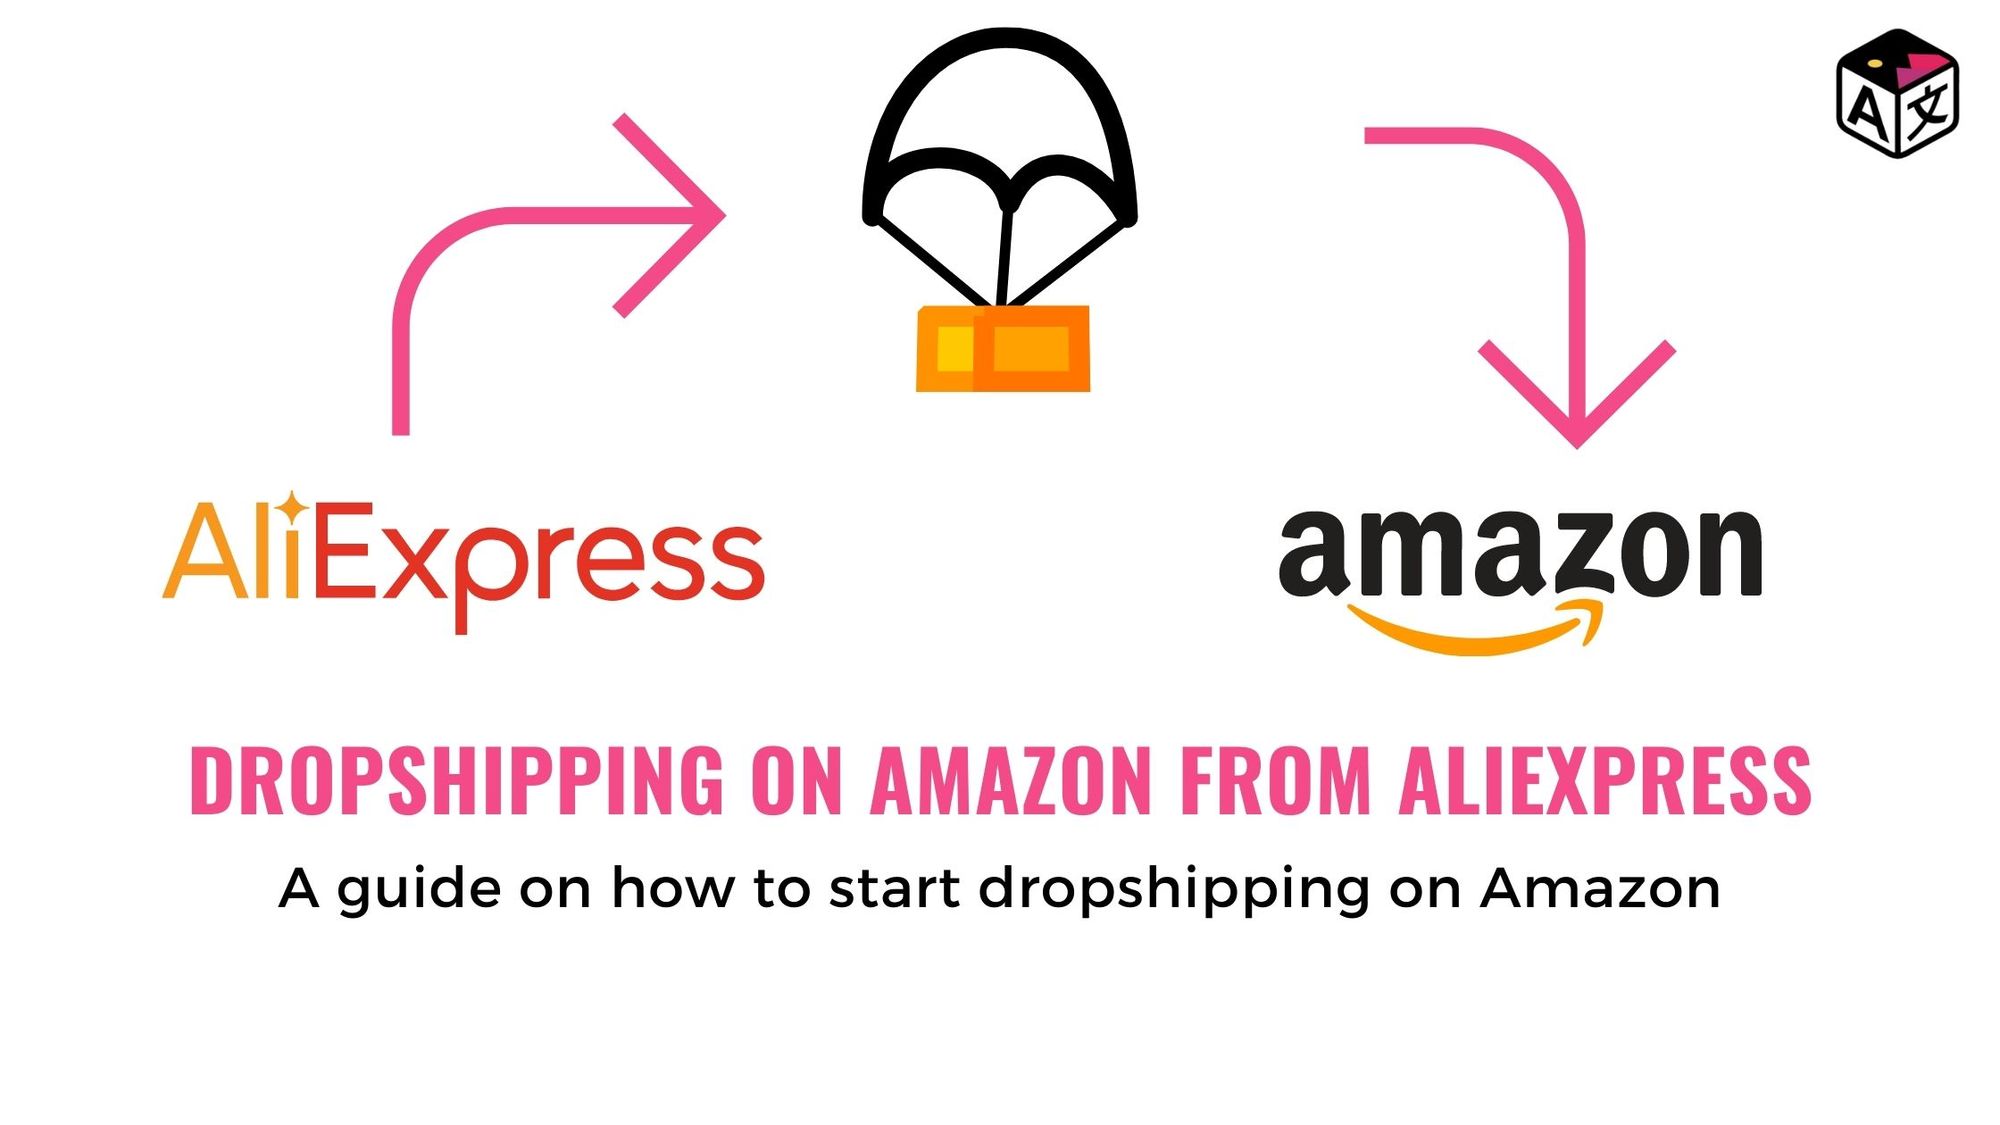 Dropshipping Guide: What You Should Know to Dropship on